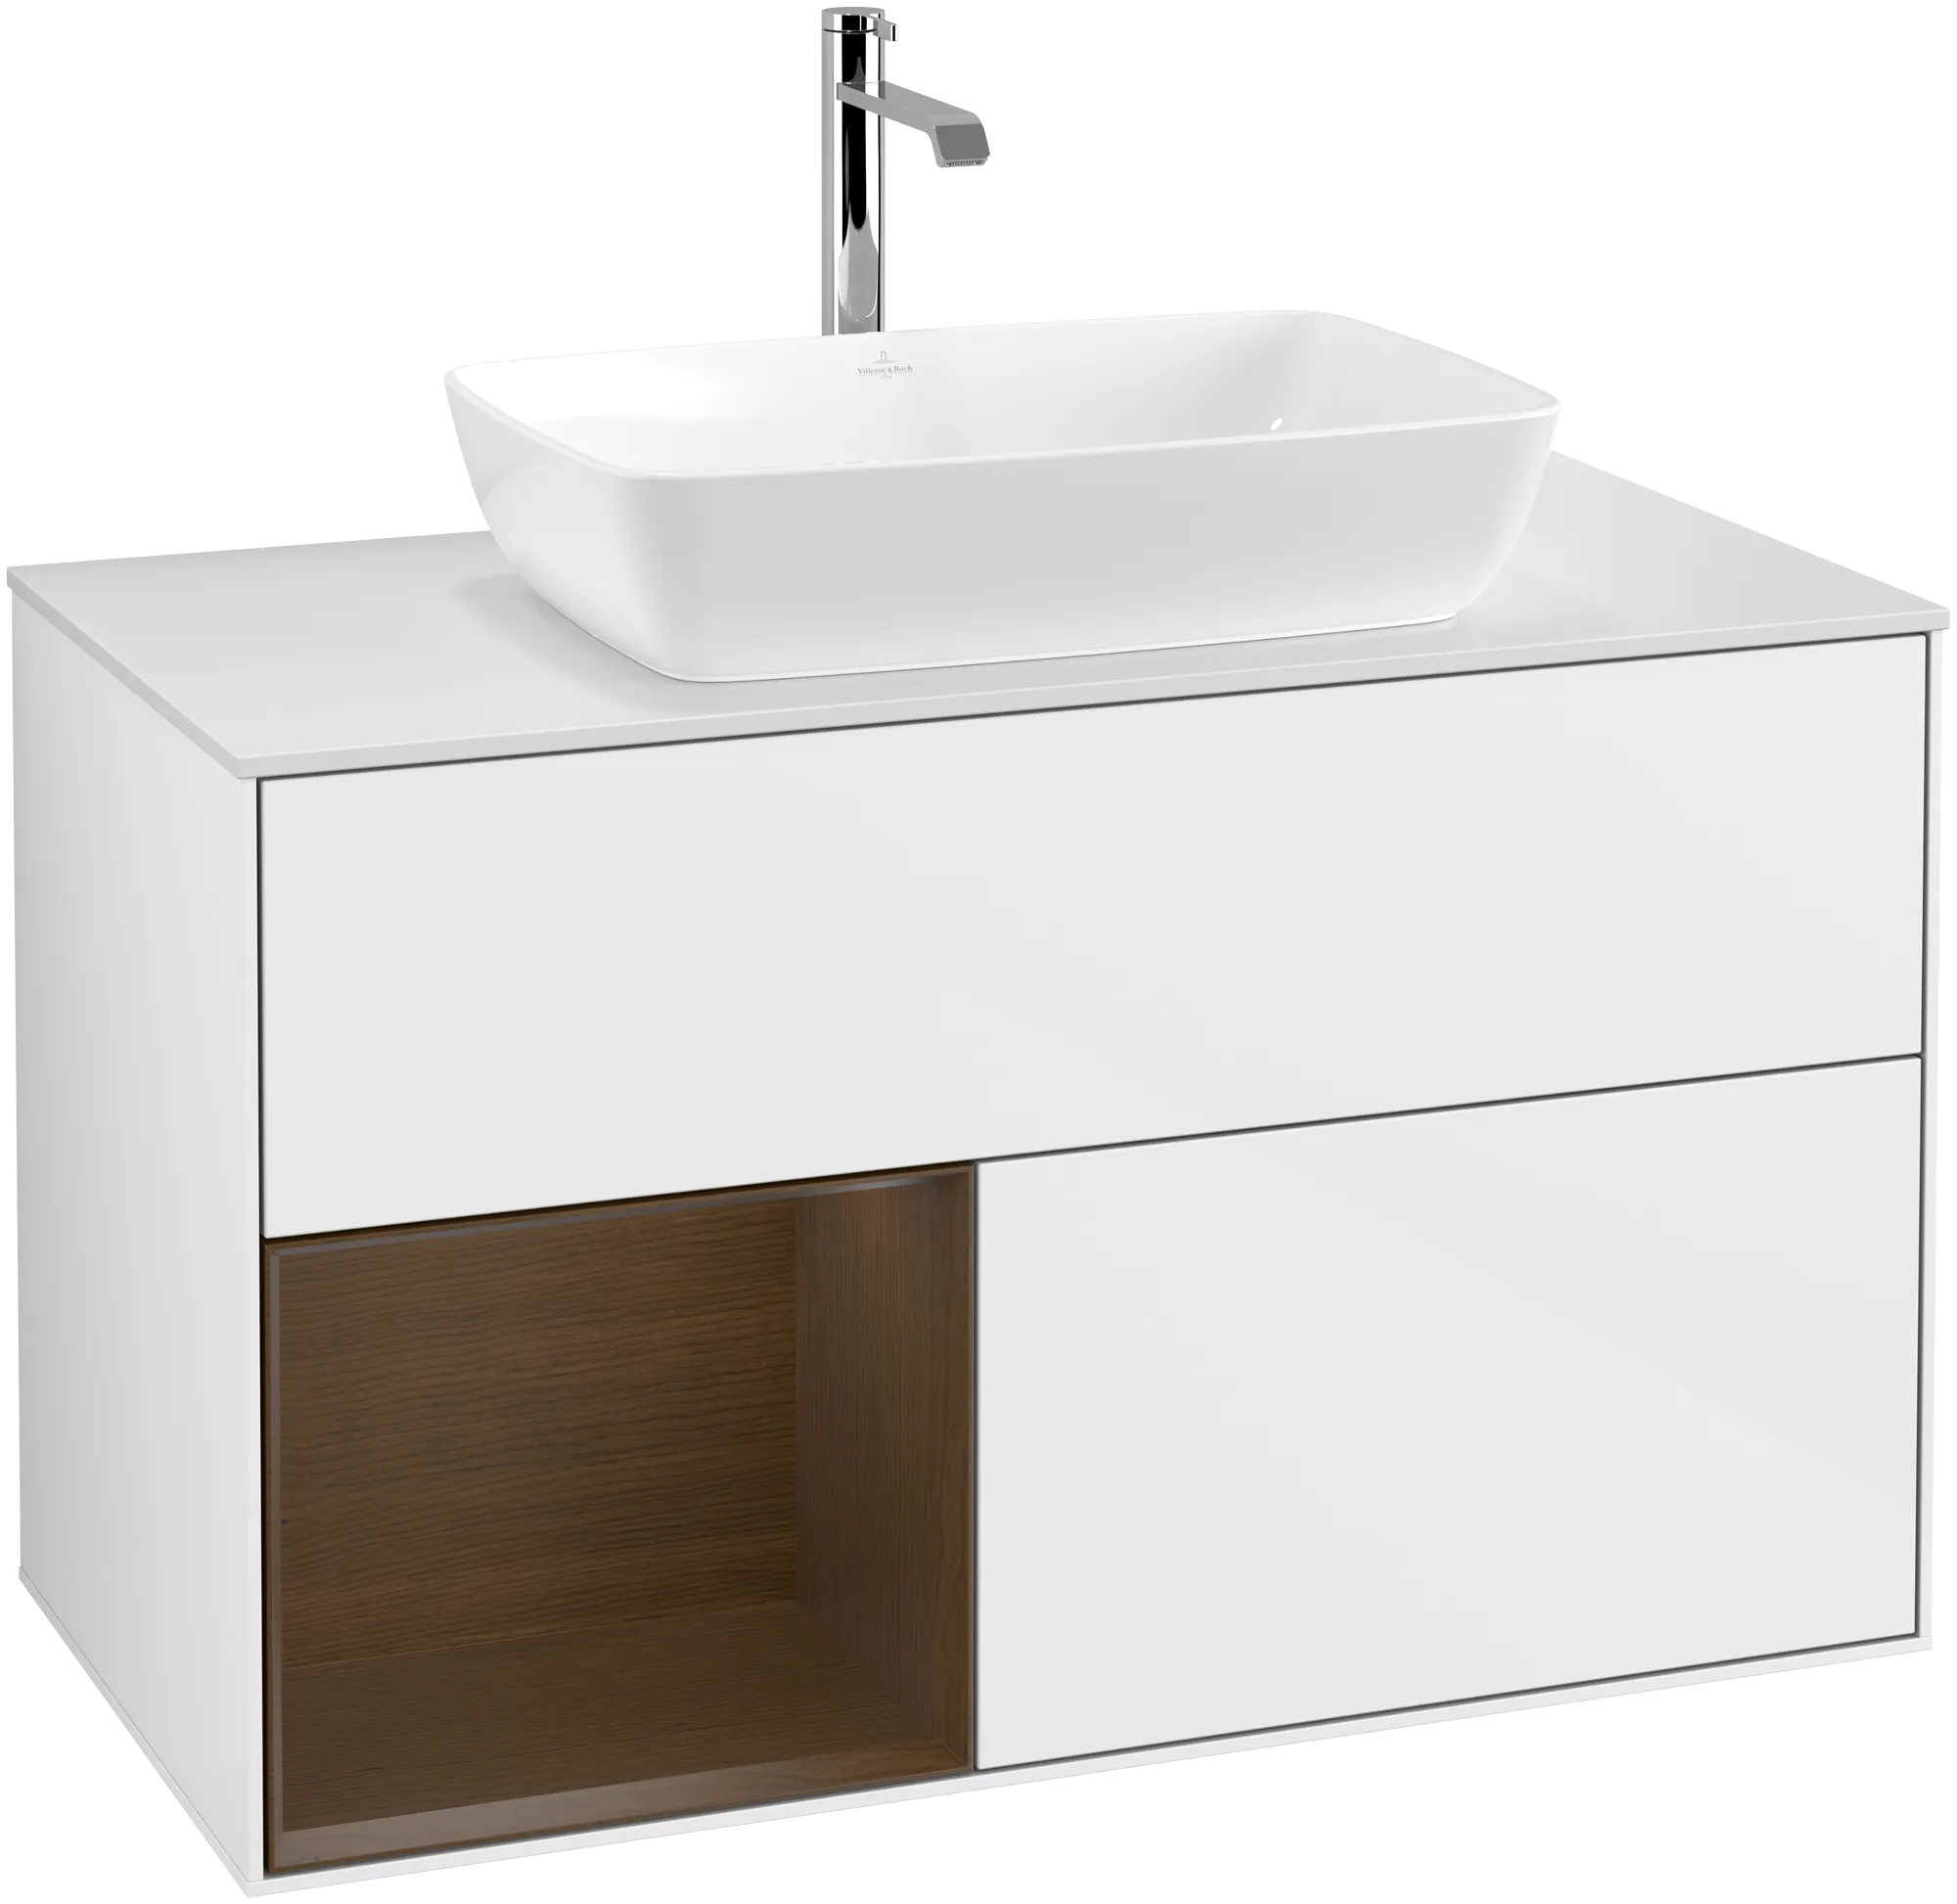 VILLEROY BOCH Finion Vanity unit, with lighting, 2 pull-out compartments, 1000 x 603 x 501 mm, Glossy White Lacquer / Walnut Veneer / Glass White Matt #G771GNGF resmi